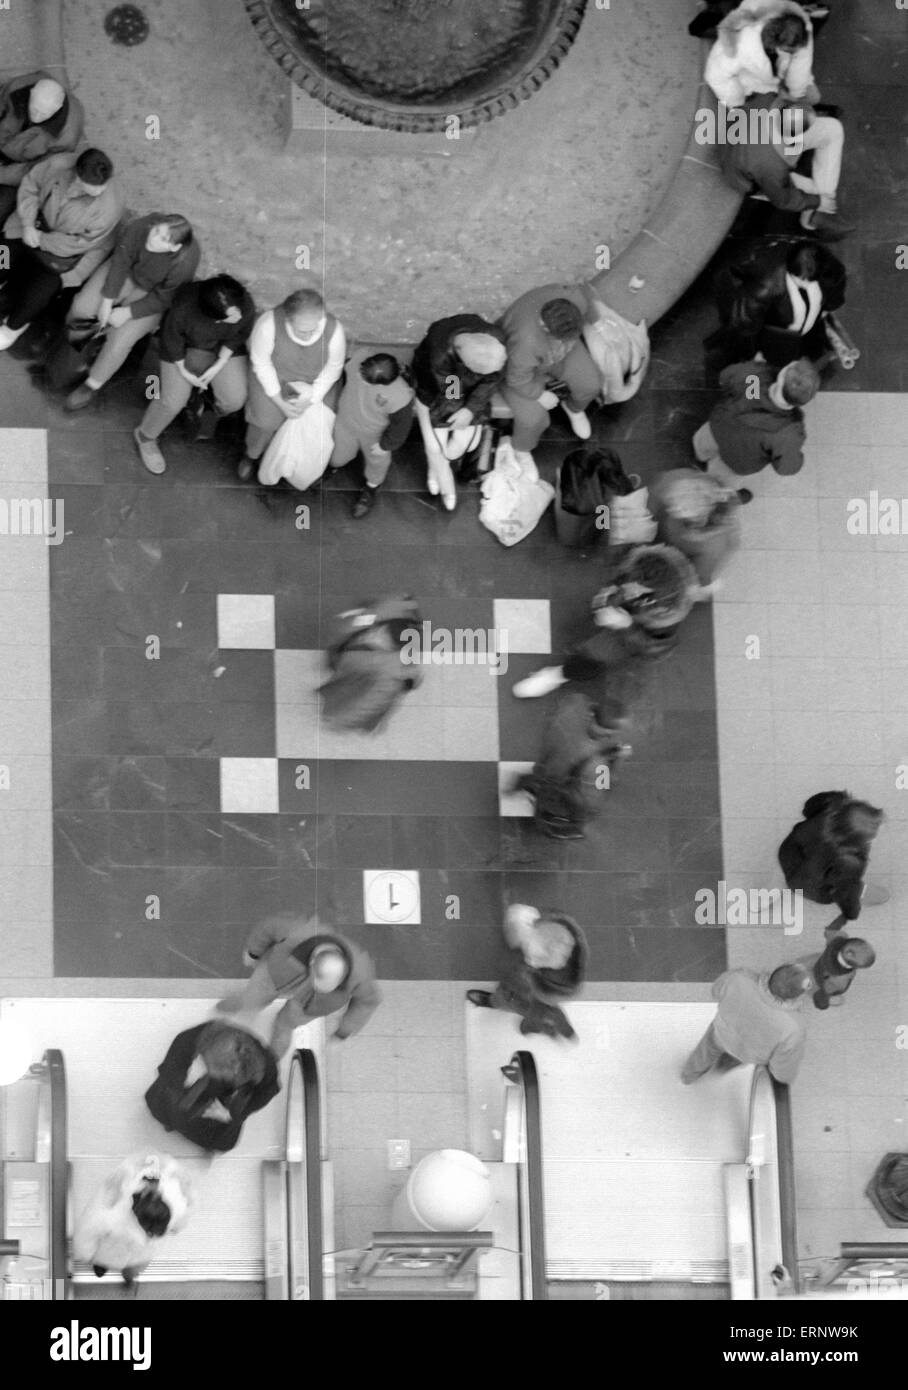 Chicago, IL, 14-Dec-1996: People take a break from Christmas shopping inside busy Marshall Field's department store on Michigan Ave. Stock Photo